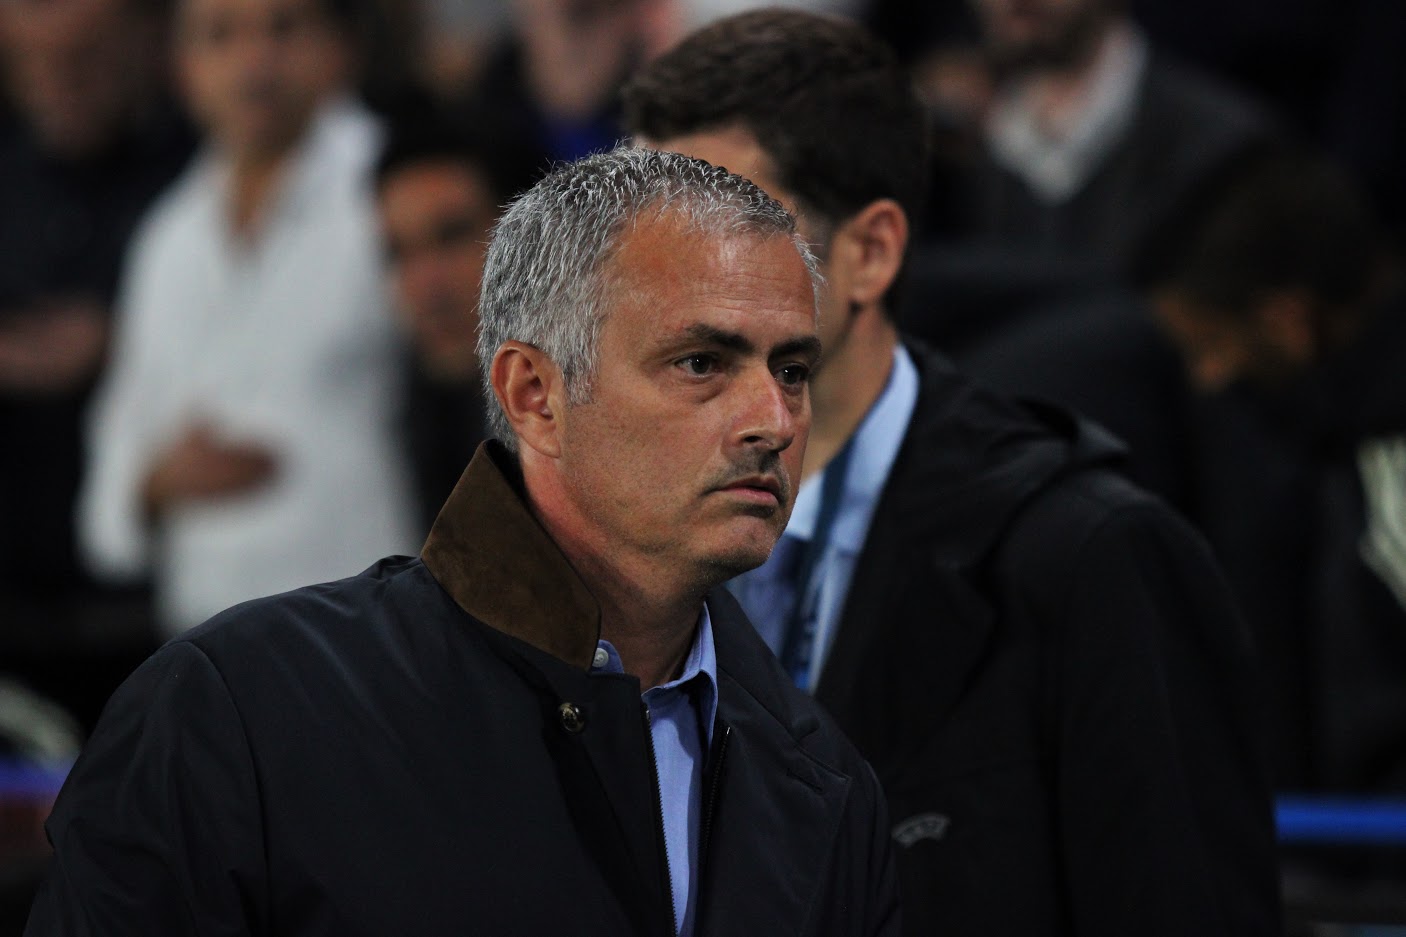 Jose Mourinho's age, 56, has not detracted in the slightest from success as a professional football manager